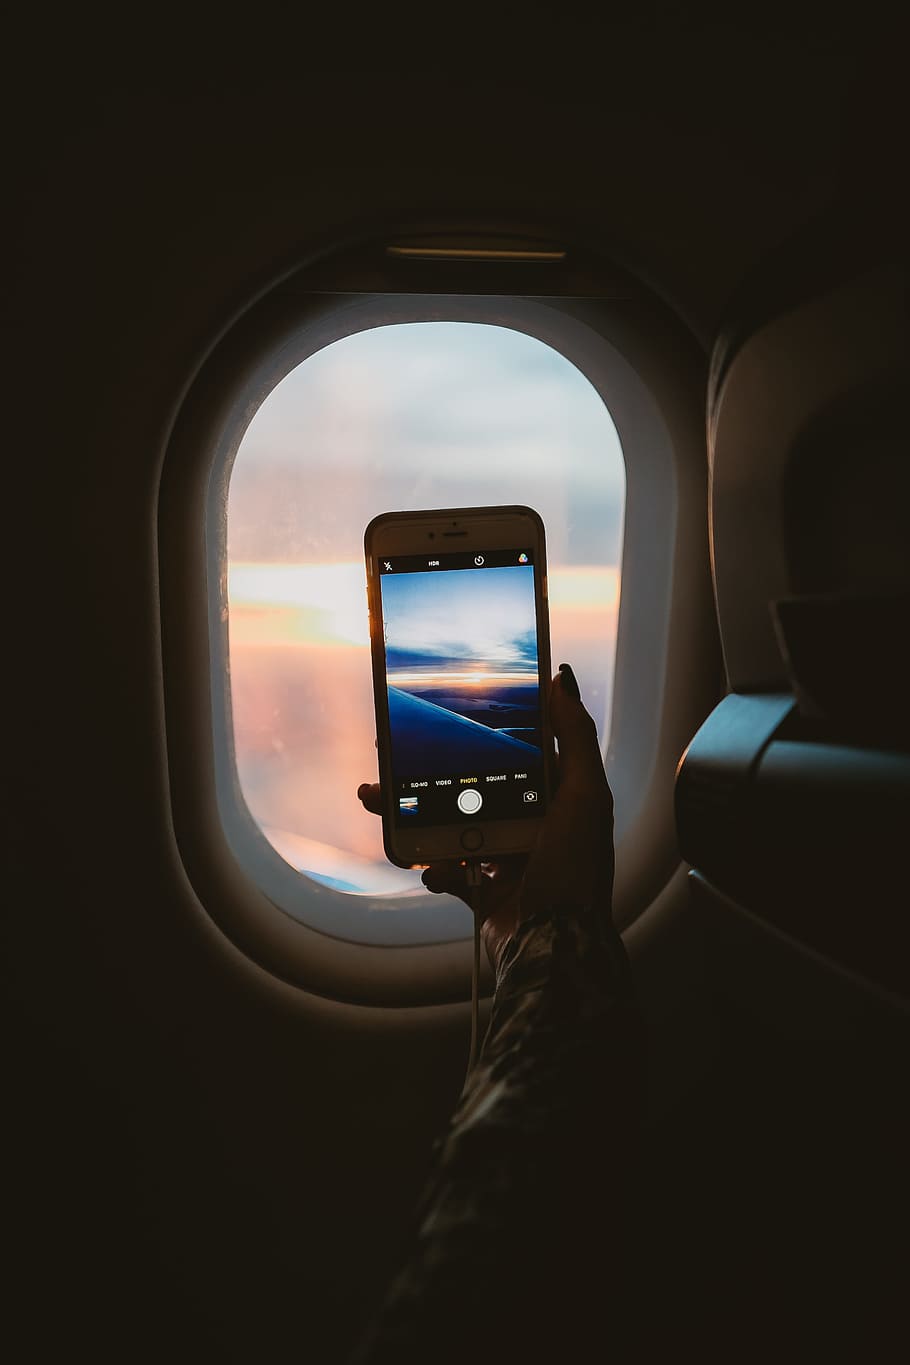 HD wallpaper: person taking picture of window plane, phone, sunset, sunrise  | Wallpaper Flare